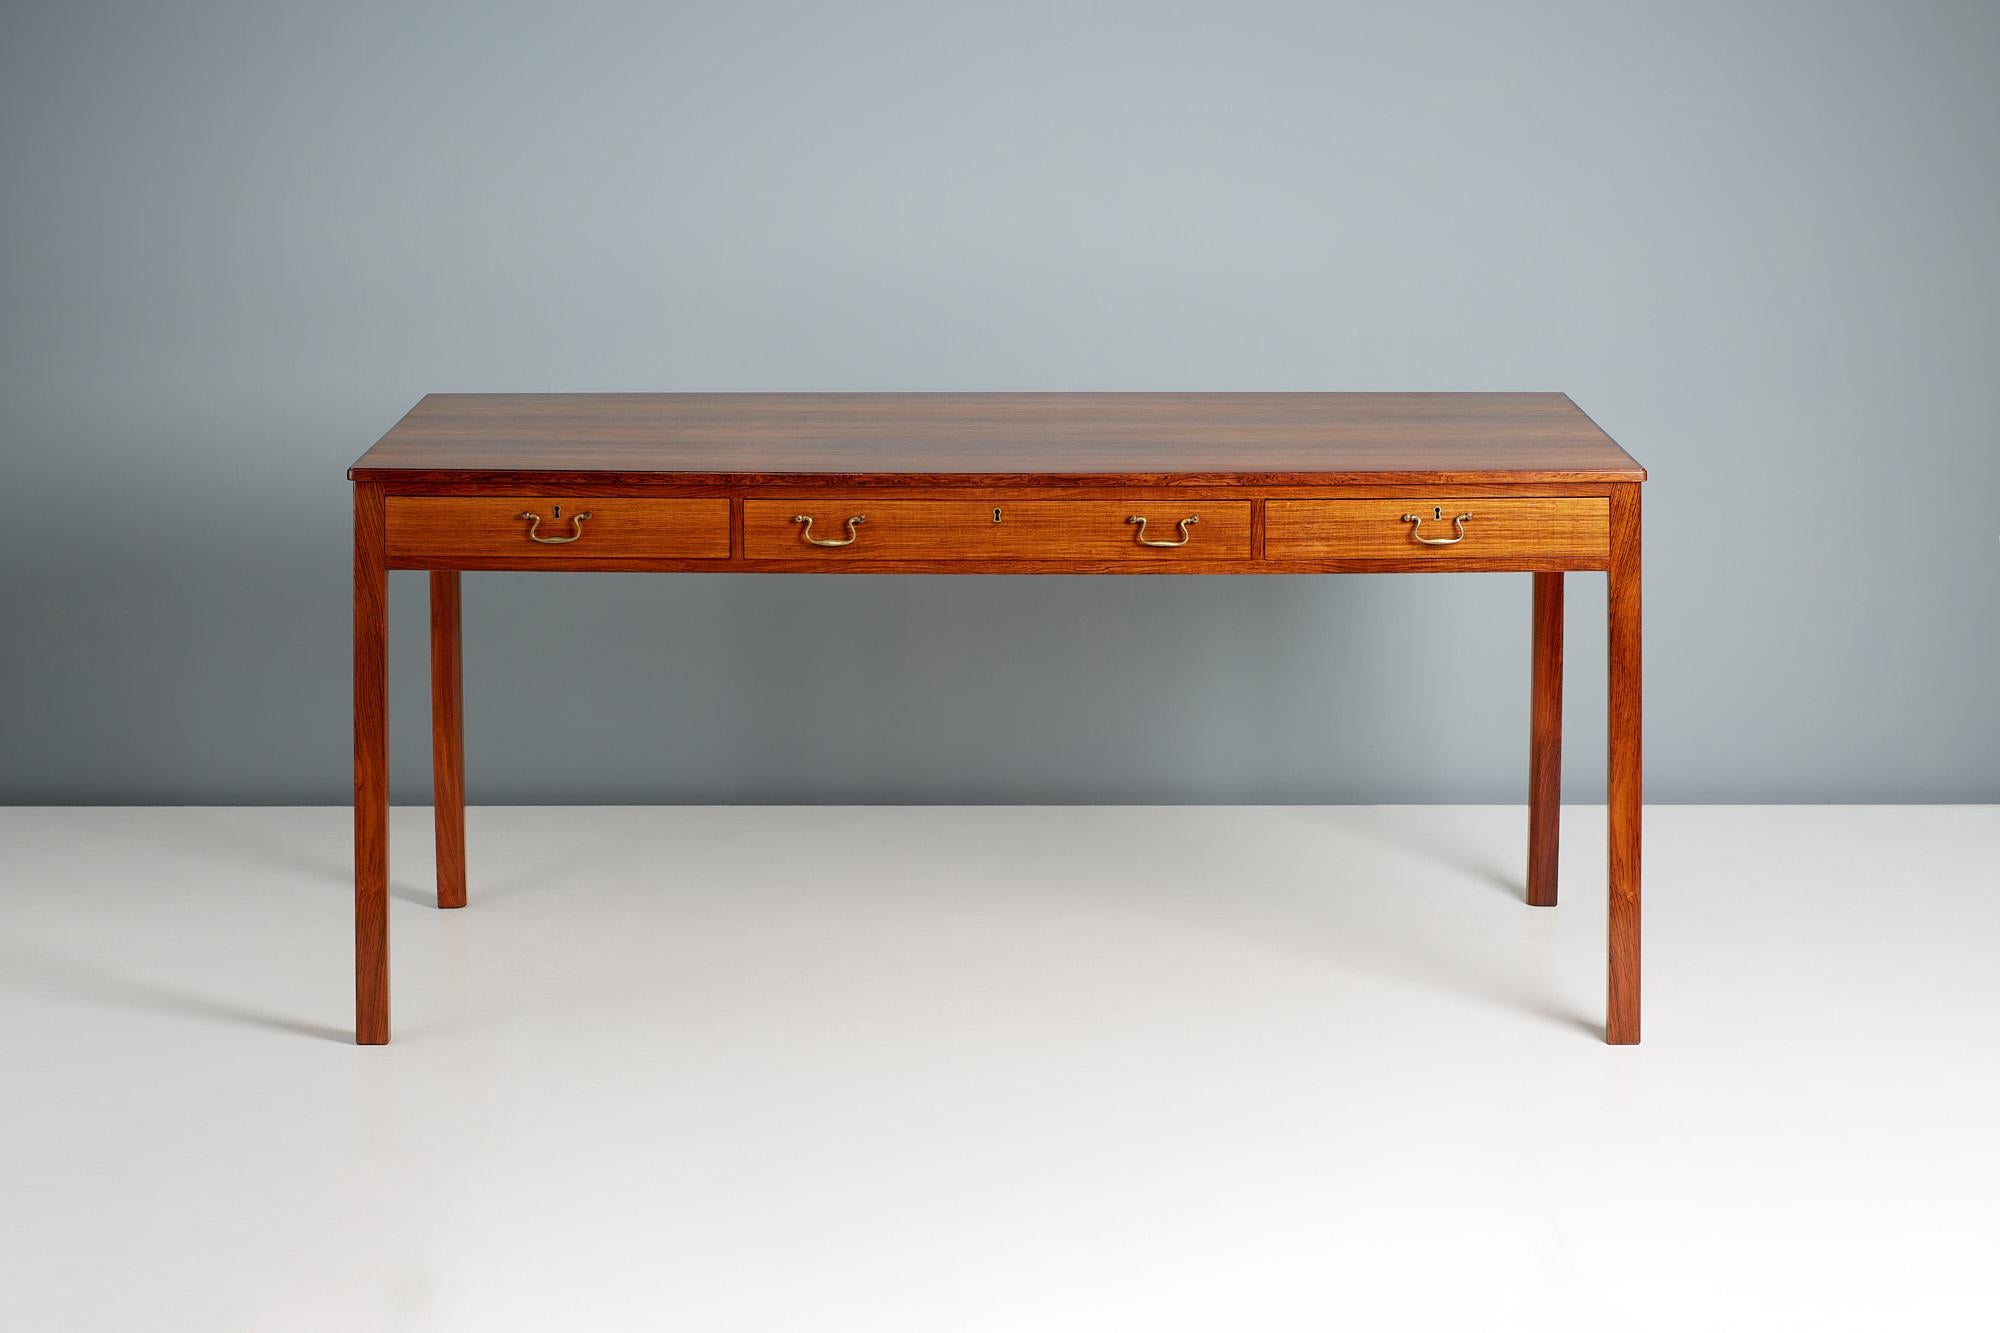 Bernt Petersen - 1950s writing desk

Stunning desk produced by master cabinetmakers Rud. Rasmussen in Denmark c1950s. The legs and drawer fronts are solid rosewood whilst the top is veneered, showcasing the exquisite grain. The desk is in